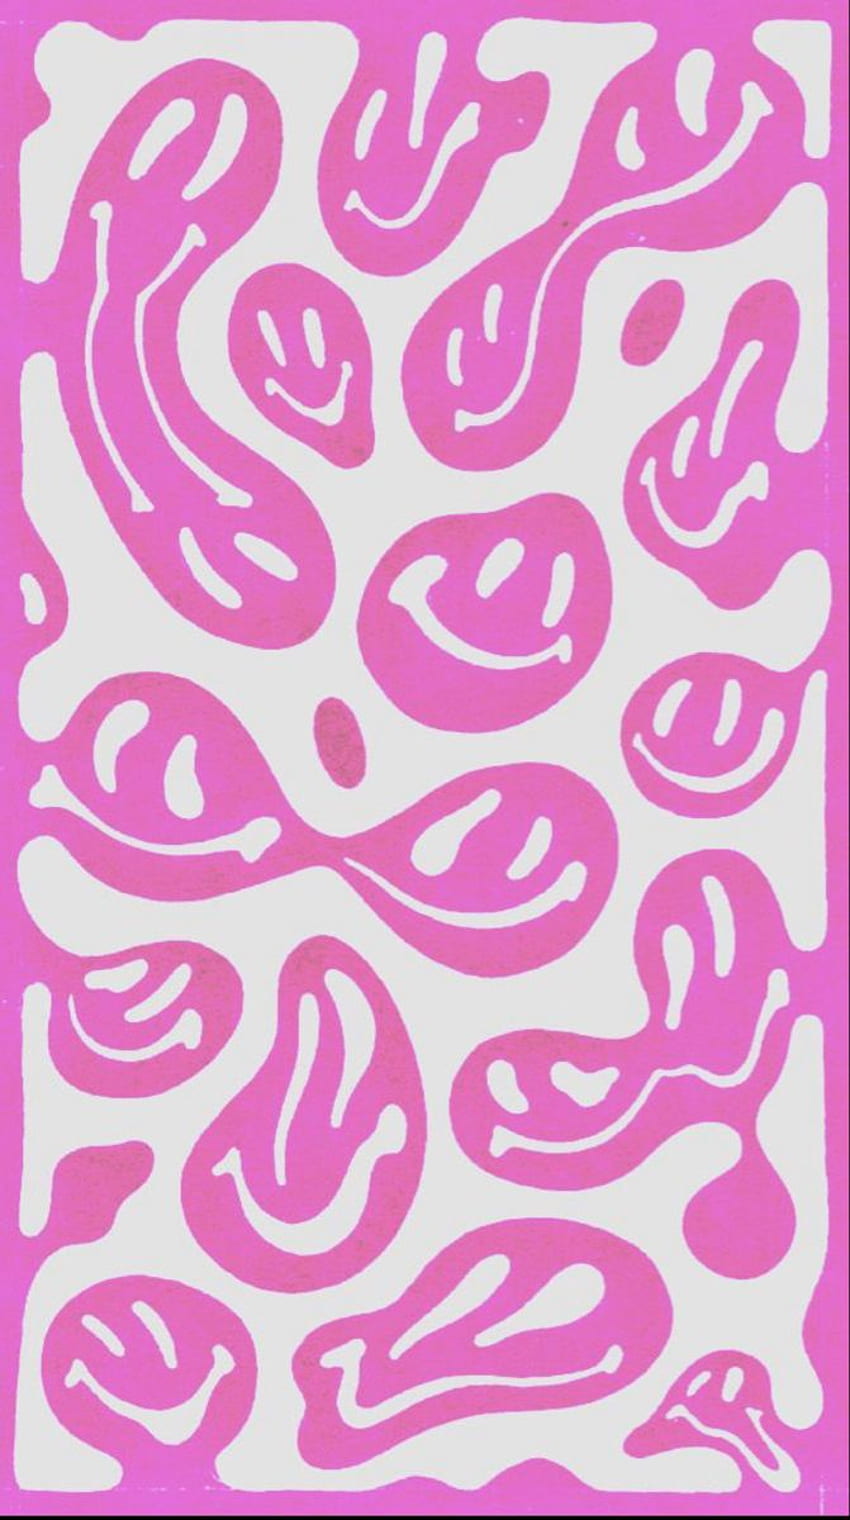 red melting smiley face wallpaper  Edgy wallpaper Iphone wallpaper  pattern Trippy wallpaper